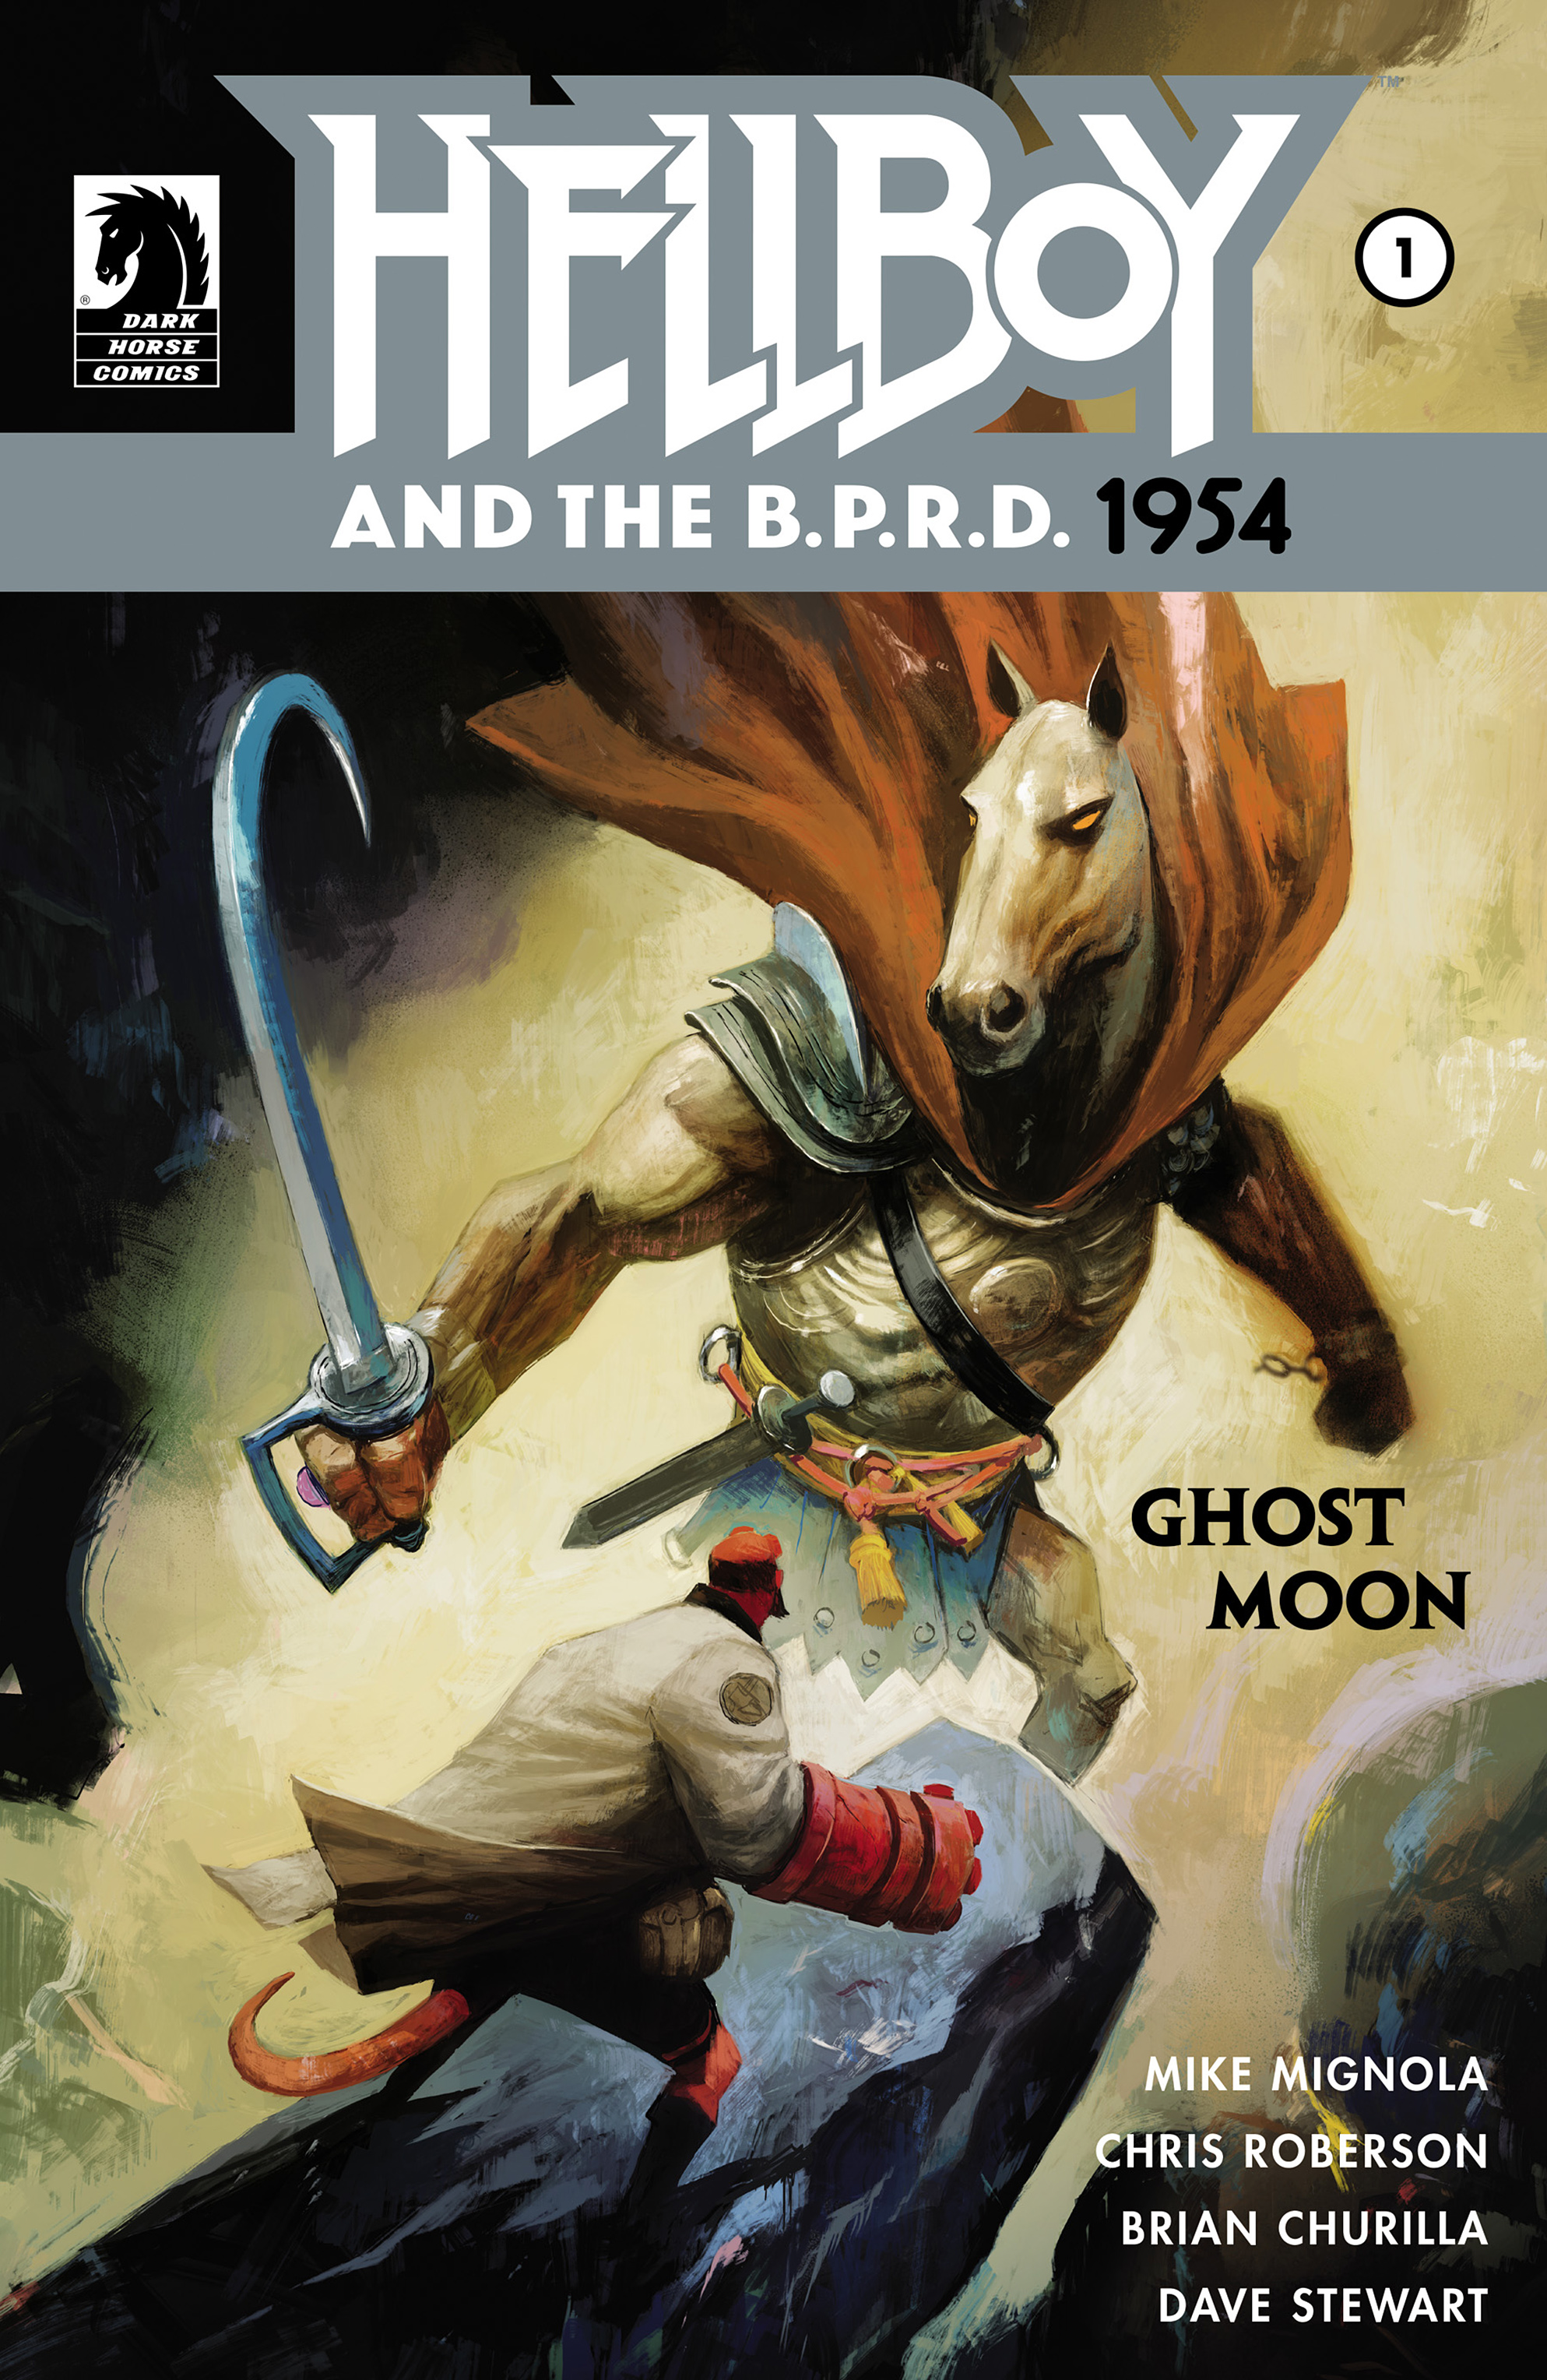 Hellboy and B.P.R.D. 1954 Ghost Moon: Chapter 1 - Page 1